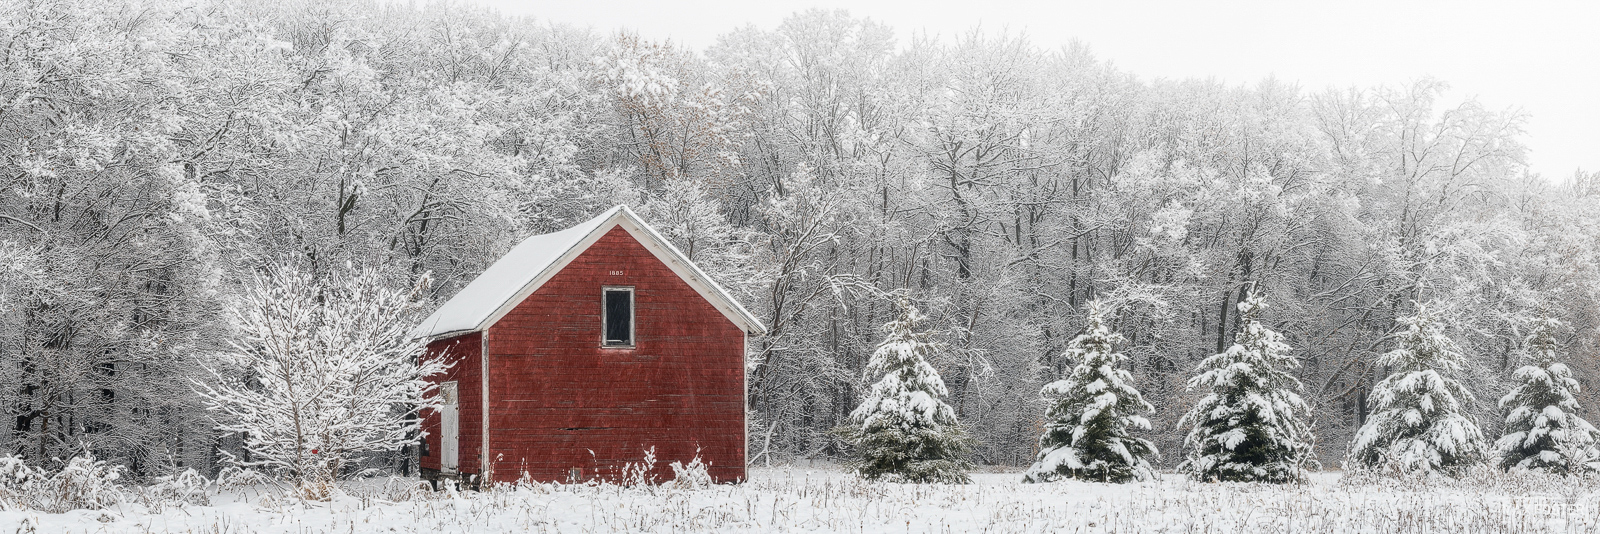 Breathe new life into your home with Henry's Woods, Max Foster's limited edition photography print of an 1885 built red barn...